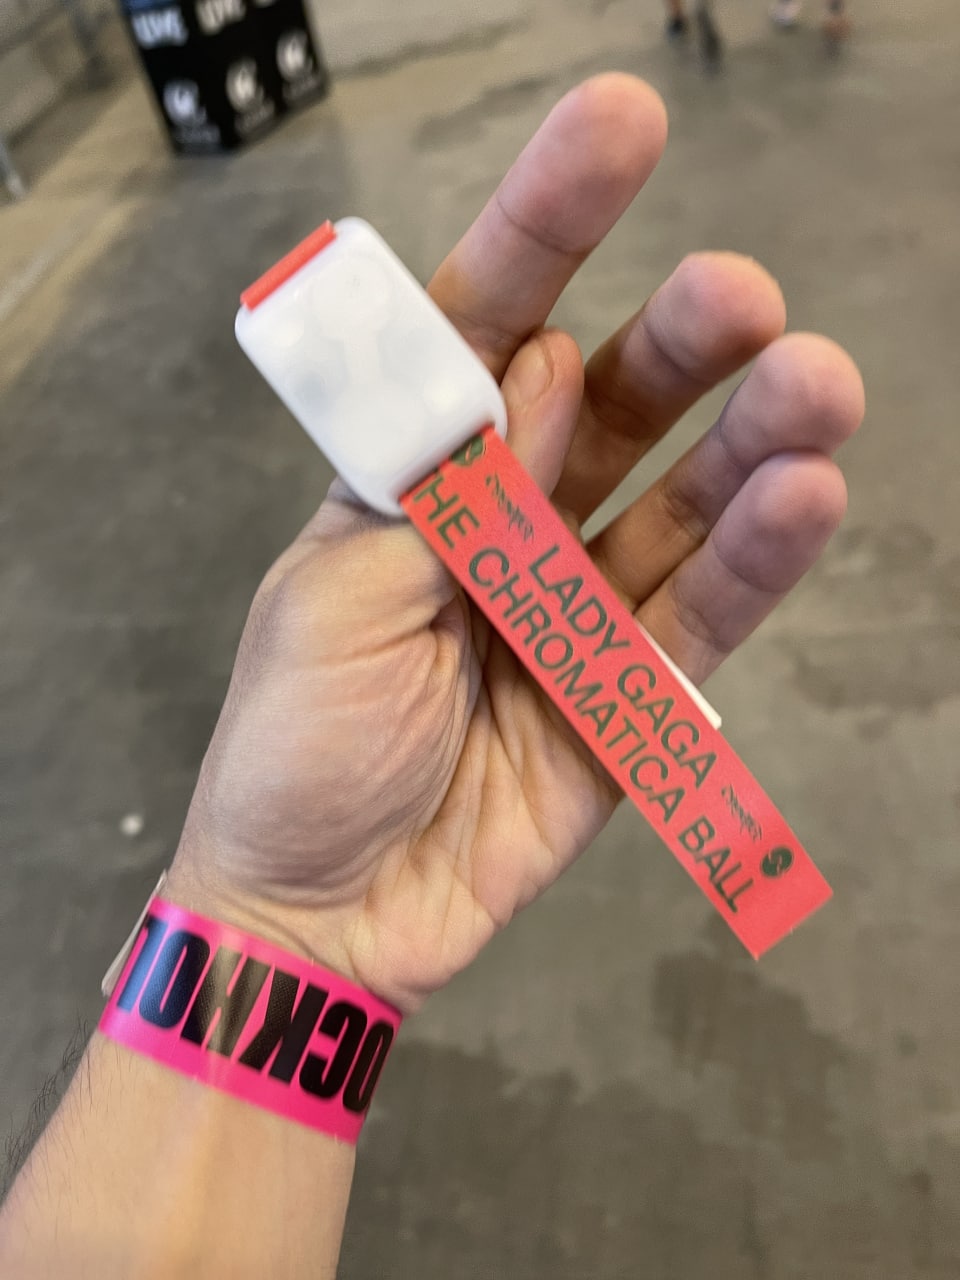 hebzuchtig Voorkomen Bruidegom Lady Gaga Now 🃏 on Twitter: "Fans in Stockholm are now receiving the LED  wristbands . https://t.co/PAVyKlyYnB" / Twitter